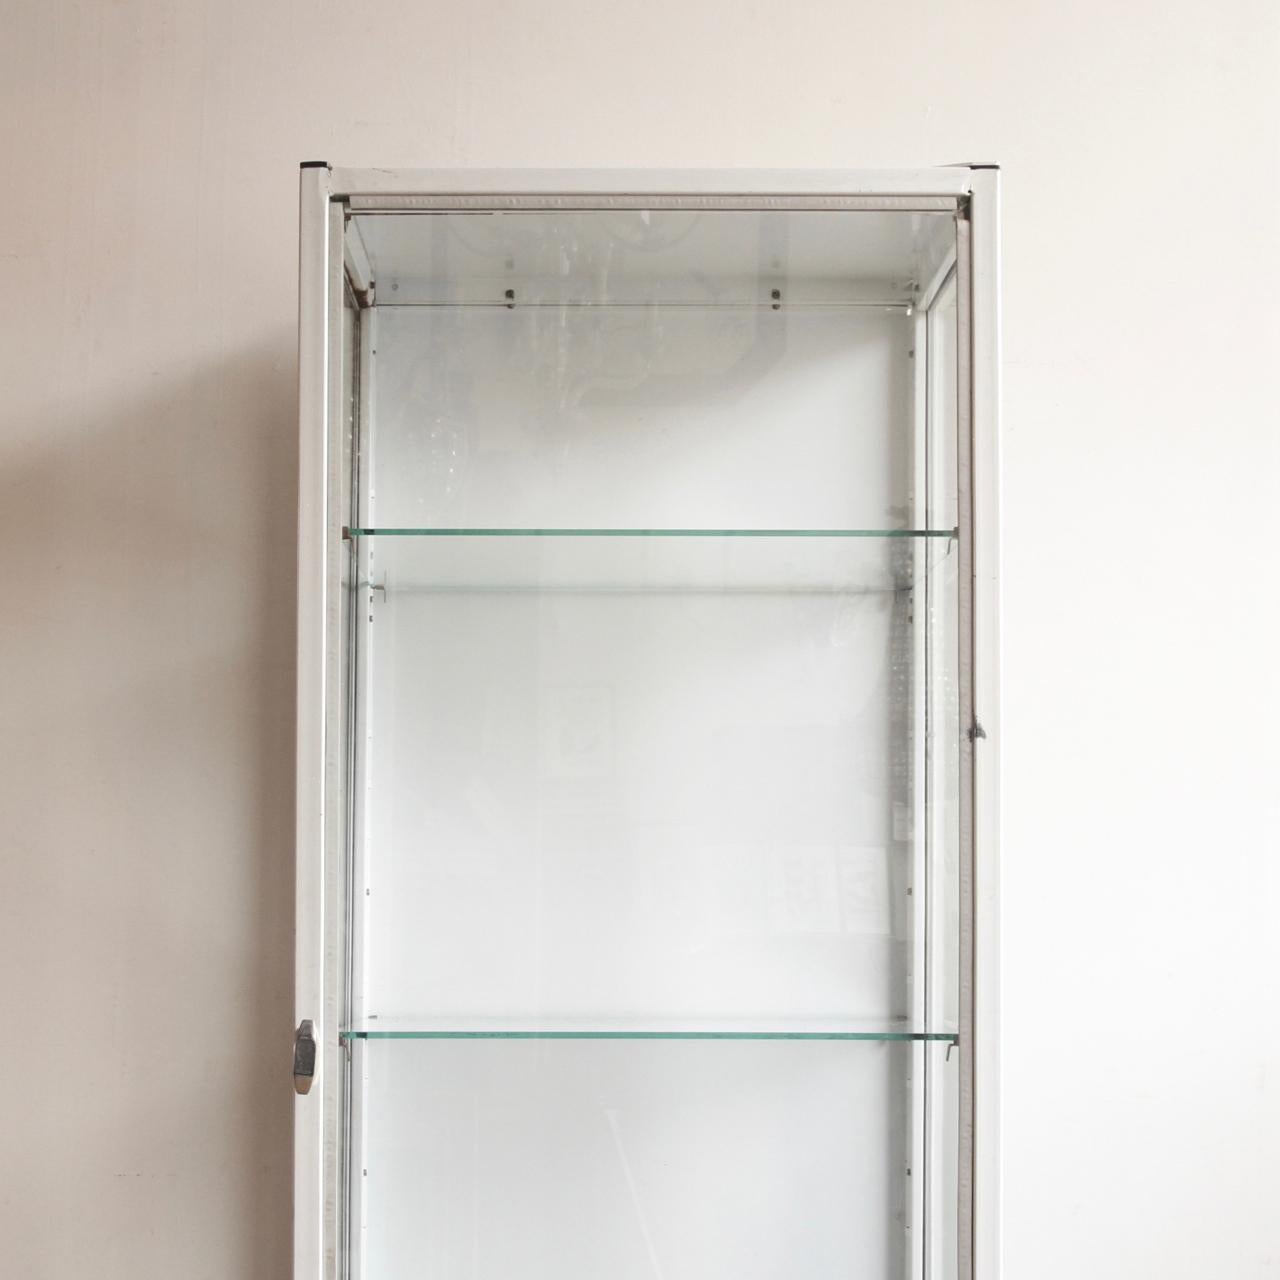 1940s, eastern European medical cabinet. This cabinet would have been used in a hospital or medical unit, for the storage of medicine and/or medical instruments. The cabinet is made from painted steel and features two glass shelves, it would make an